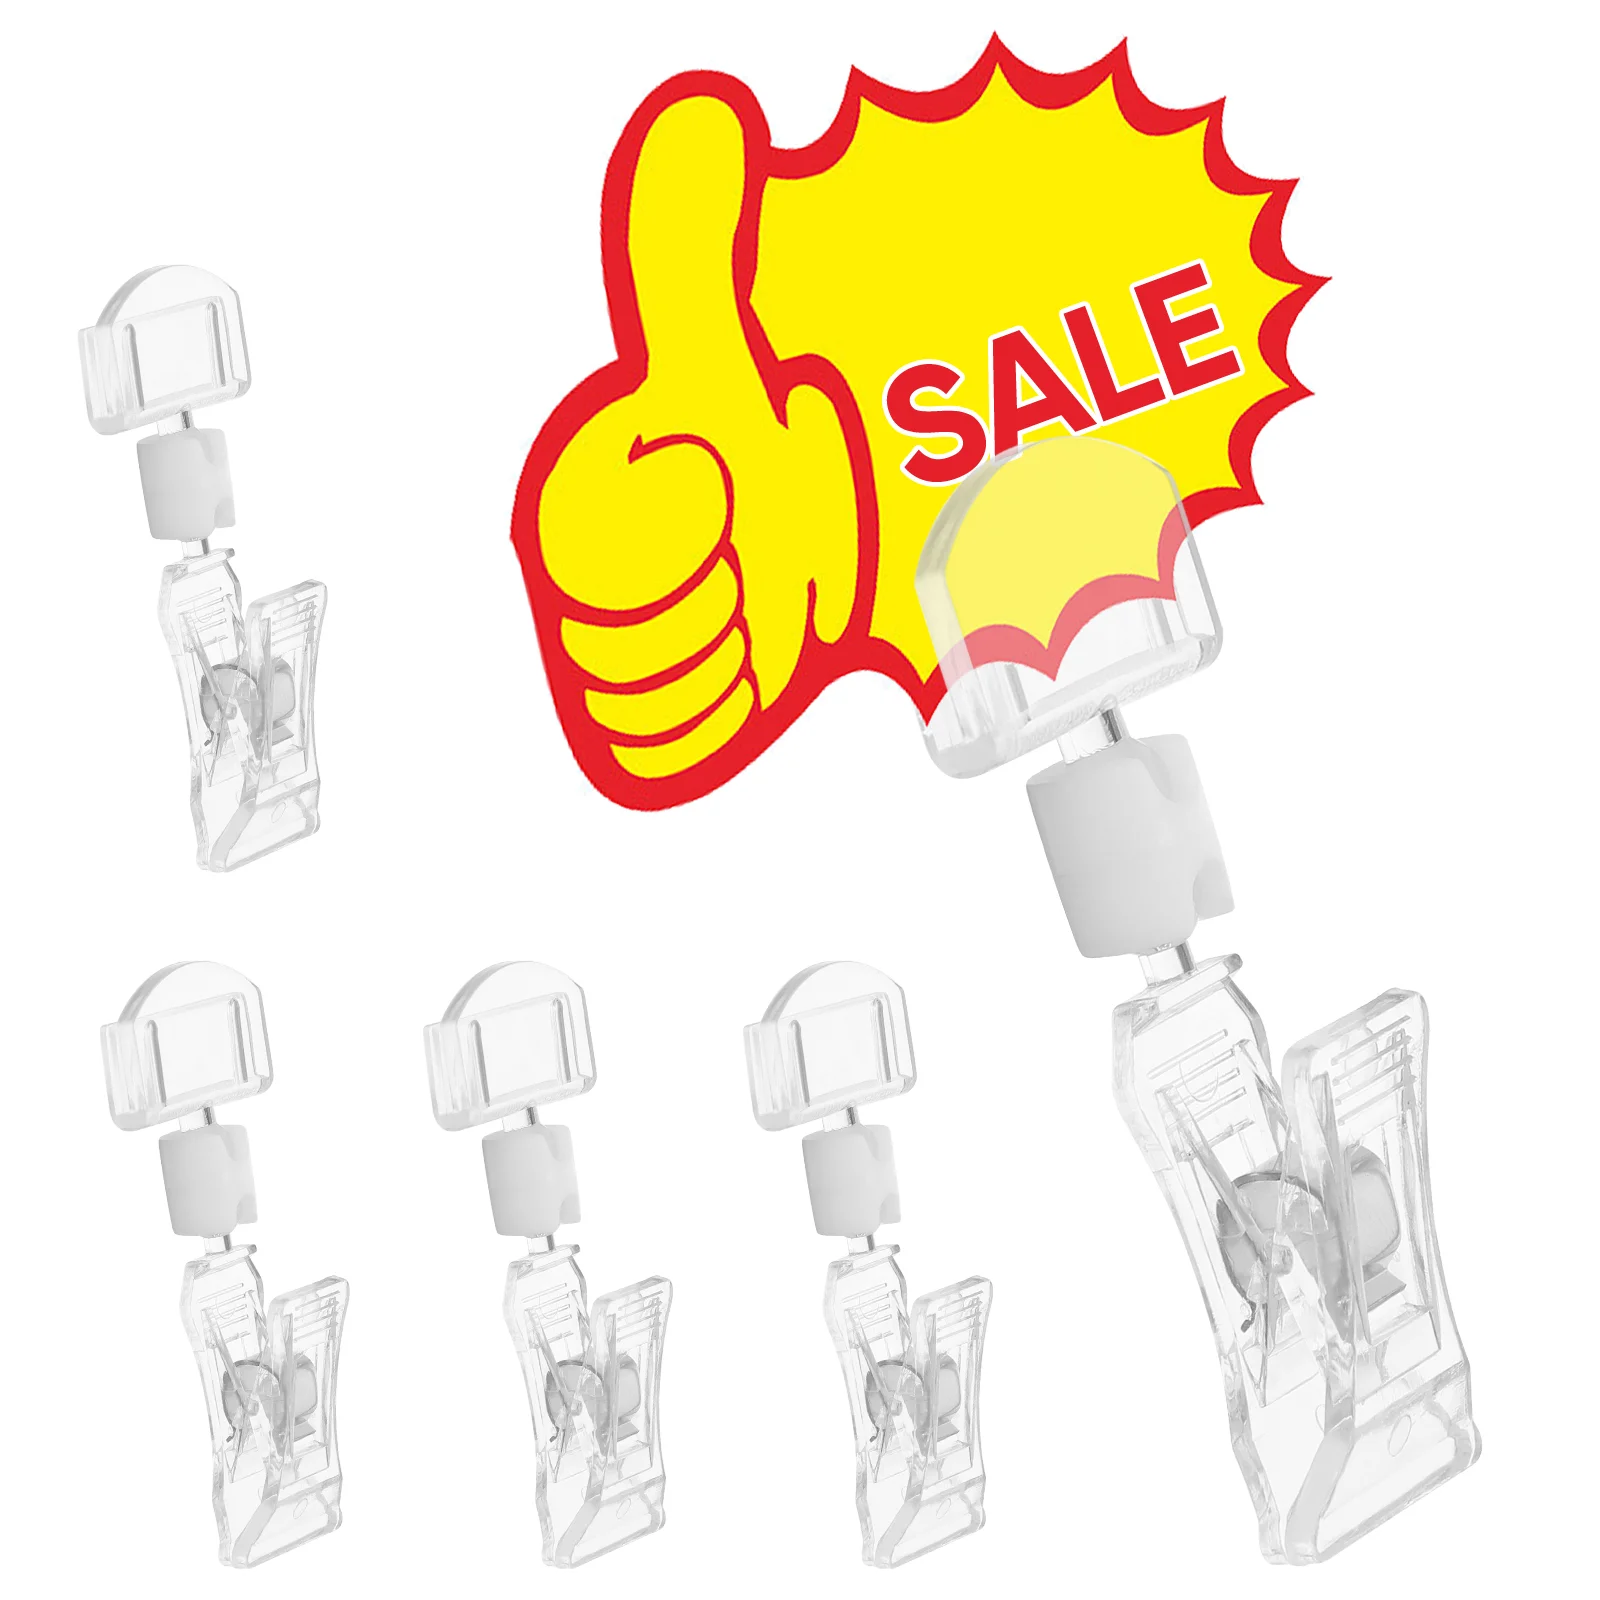 

10pcs Acrylic Price Tag Clips Rotatable Price Clip Sign Holder Retail Store Advertising Clip Business card